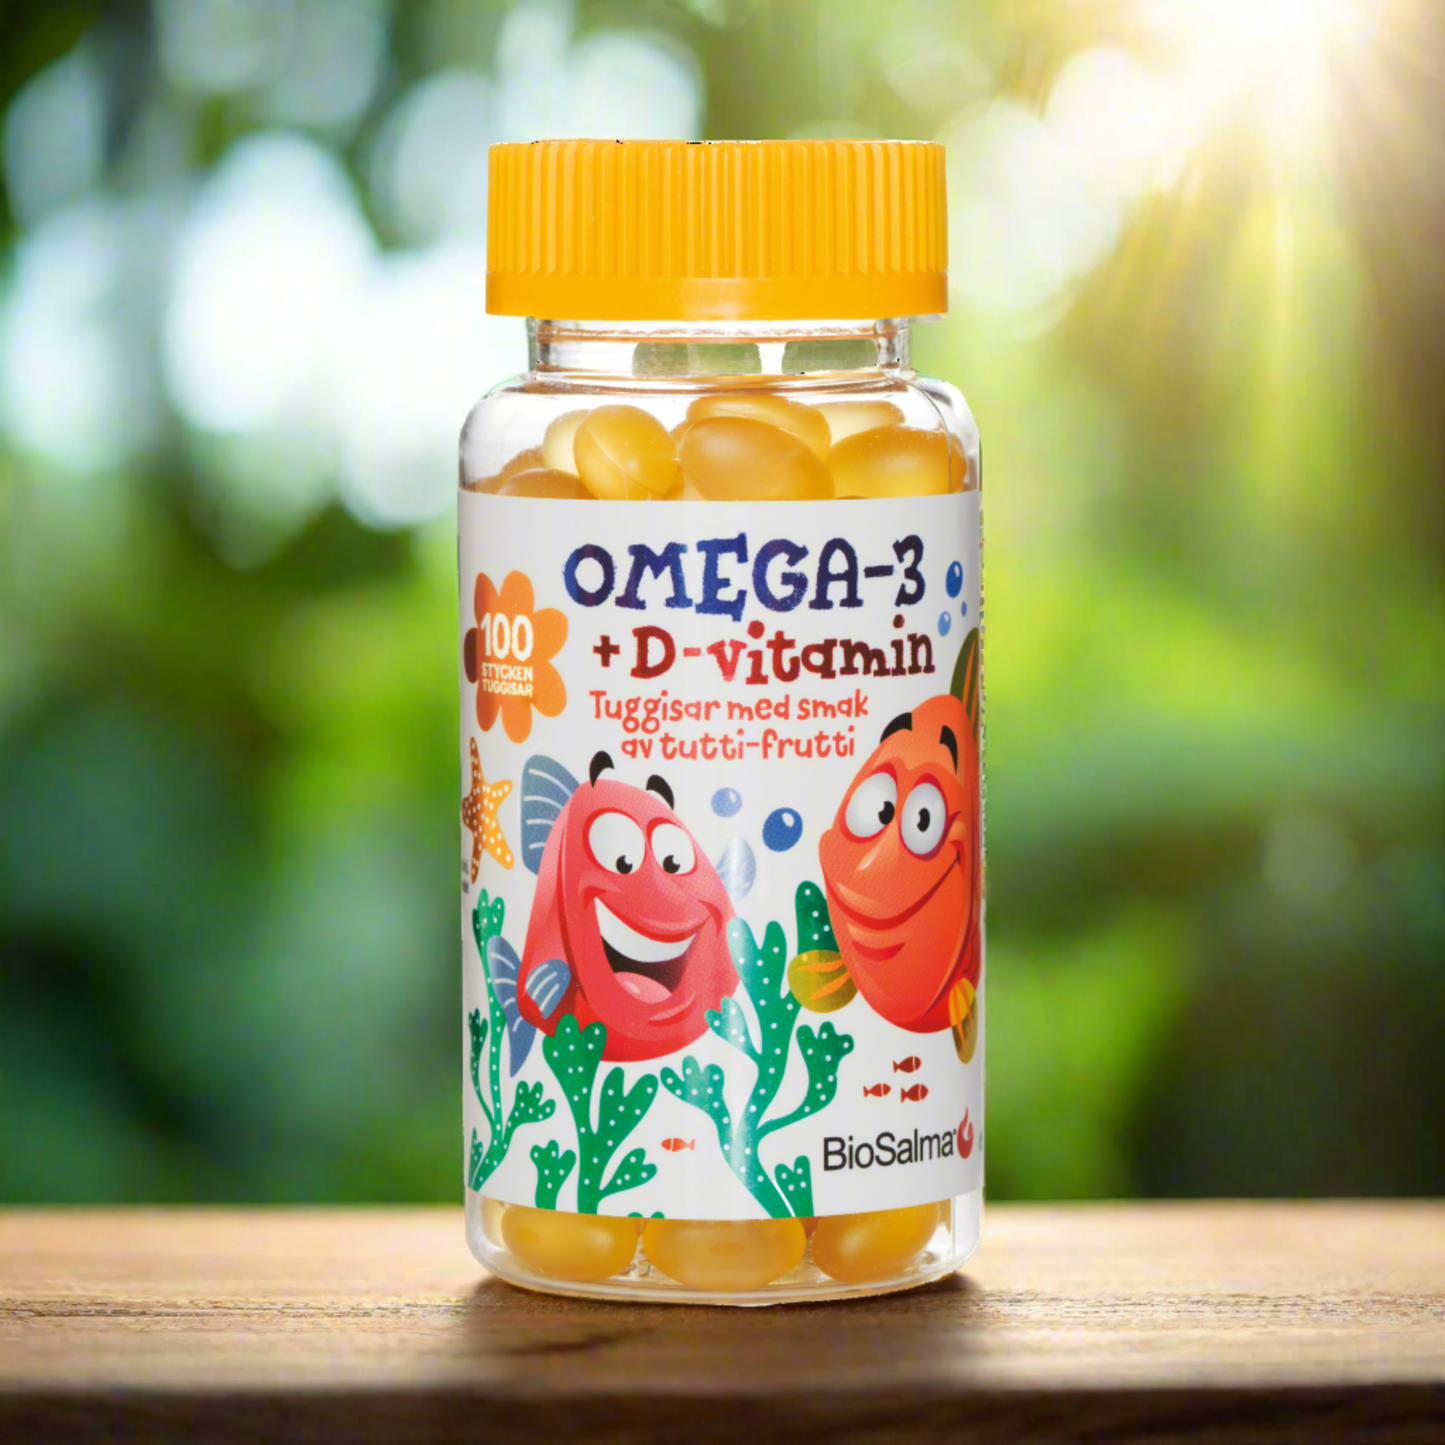 Omega-3 fish oil for children with Vitamin D3, E and K, 100 chewable capsules